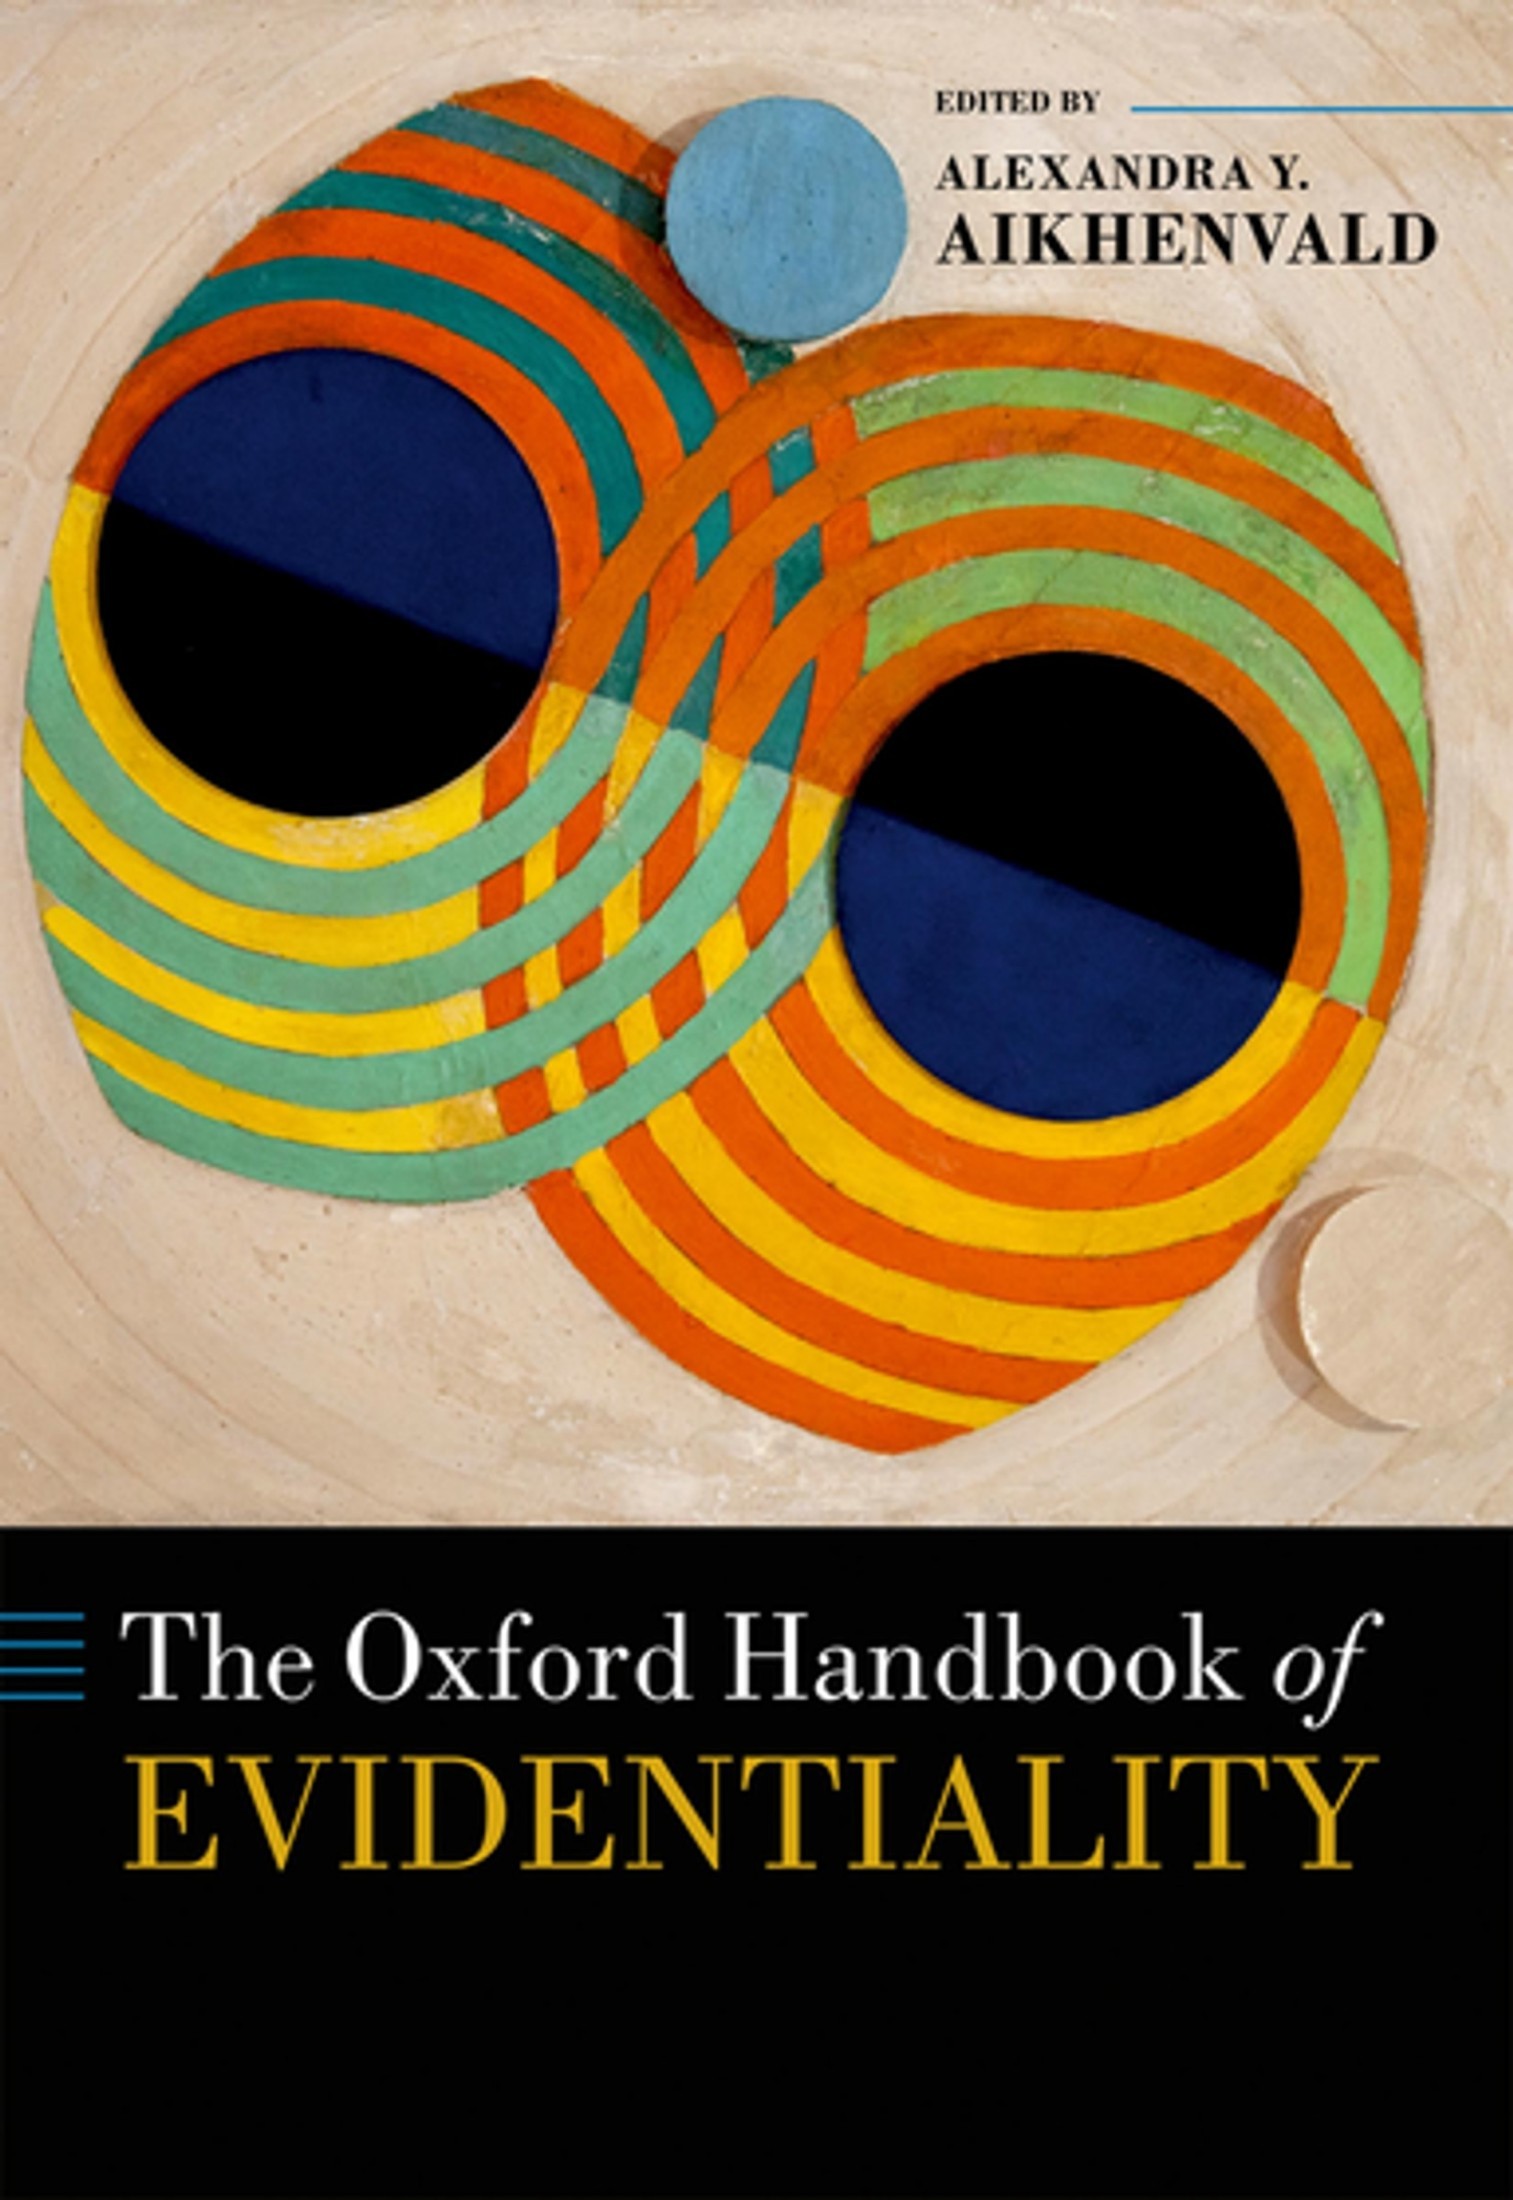 The Oxford Handbook of Evidentiality